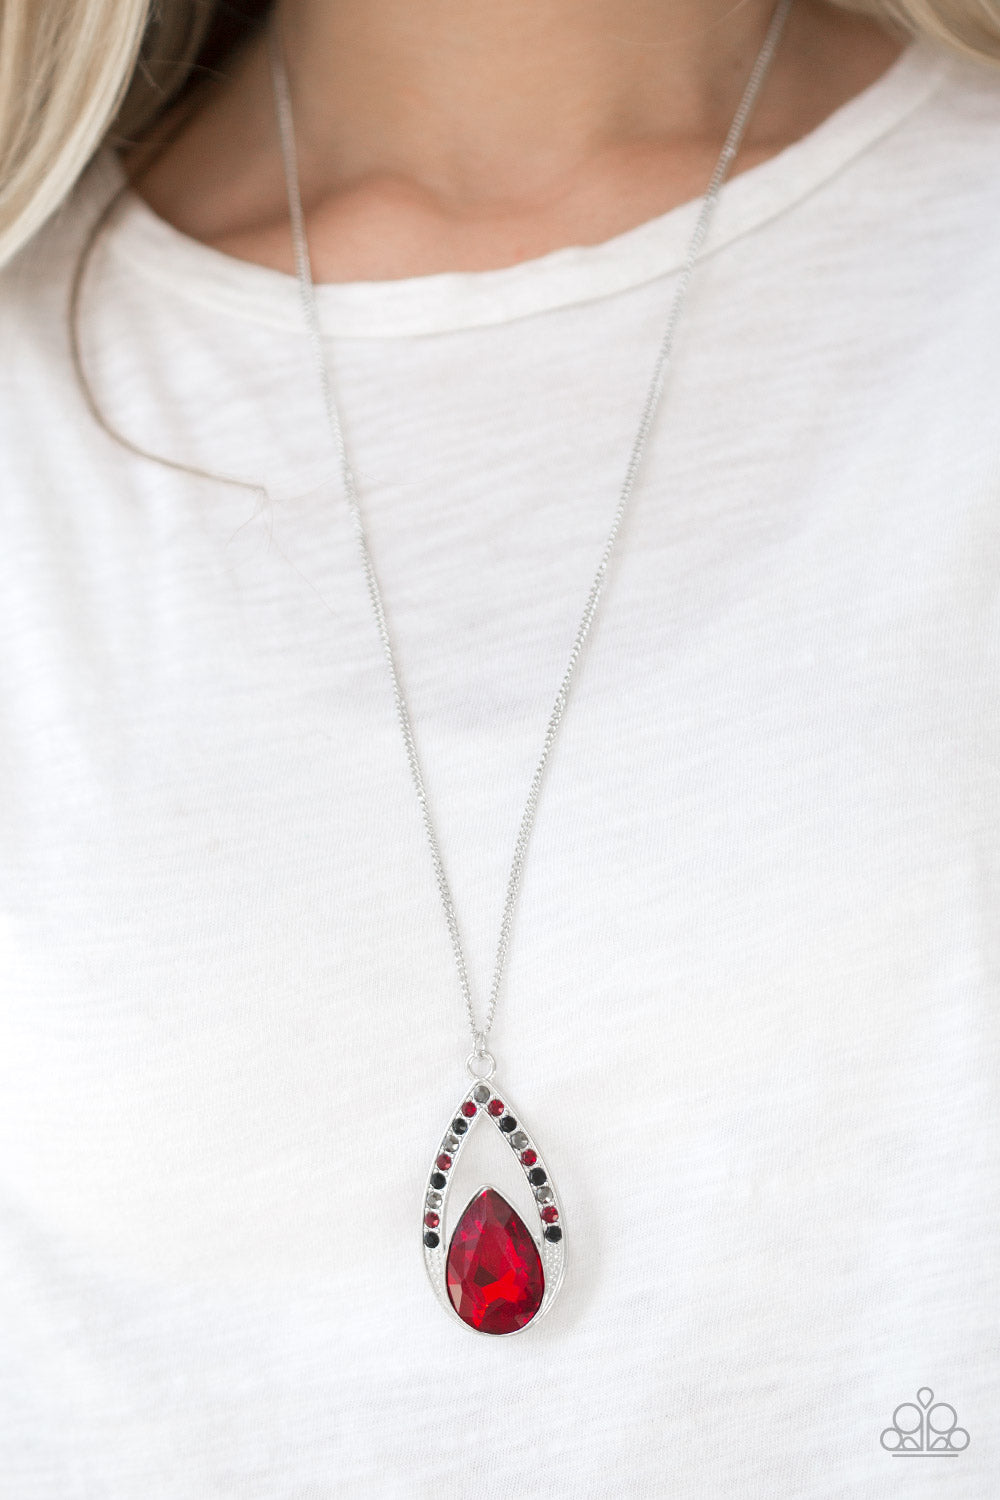 Paparazzi Accessories Necklace - A fiery red teardrop gem is pressed into a silver frame radiating with black, hematite, and red rhinestones. 